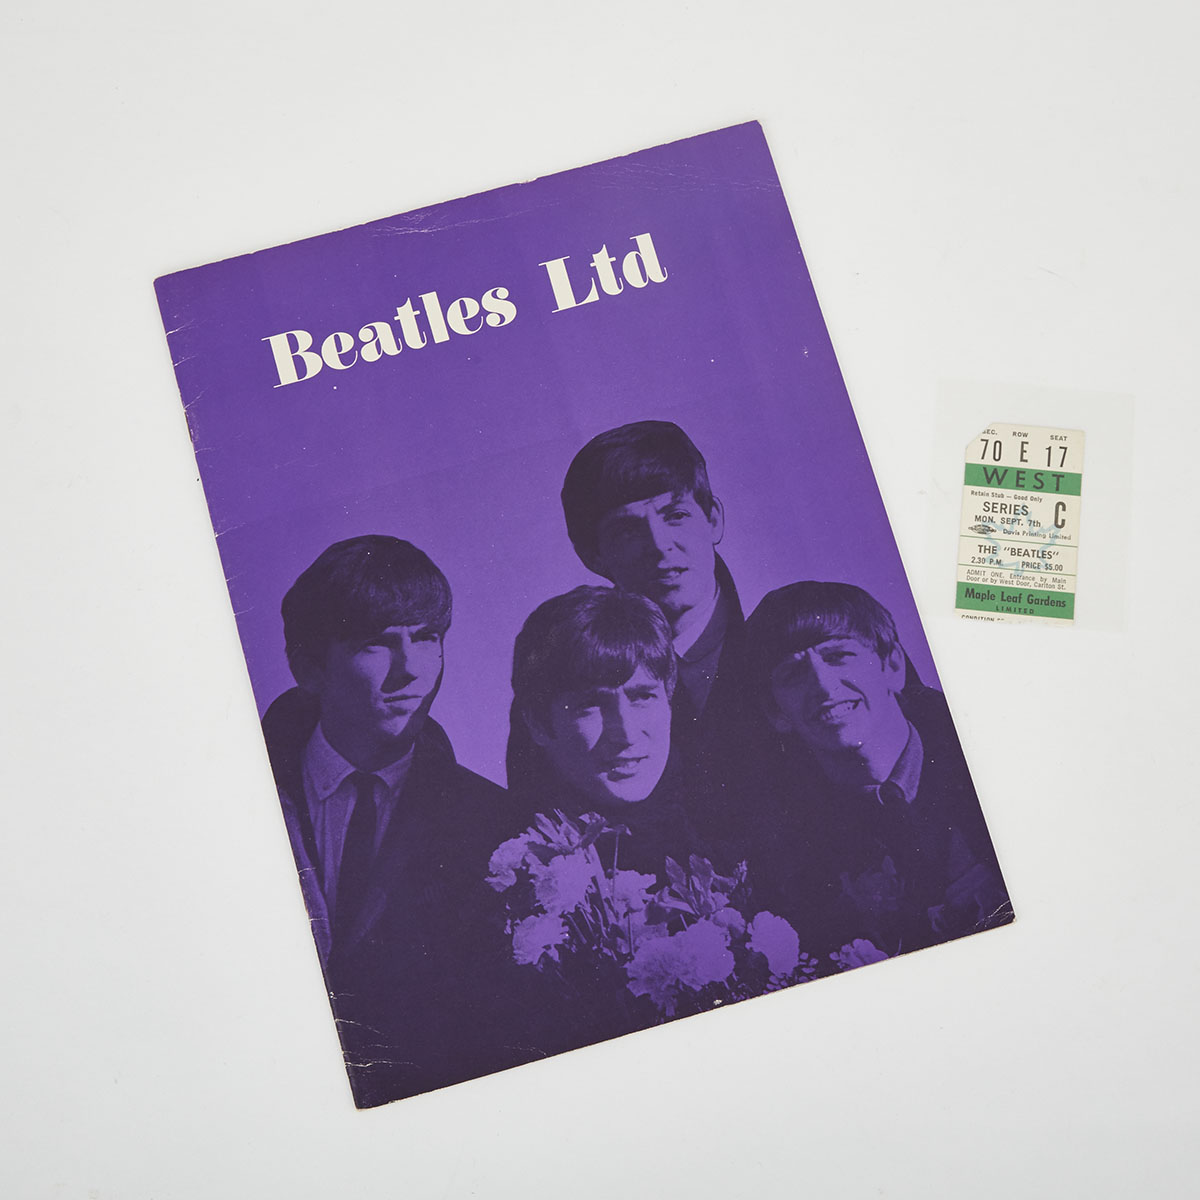 The Beatles First Concert at Maple Leaf Gardens Ticket, Sept. 7, 1964 and North American Programme: Beatles Ltd.